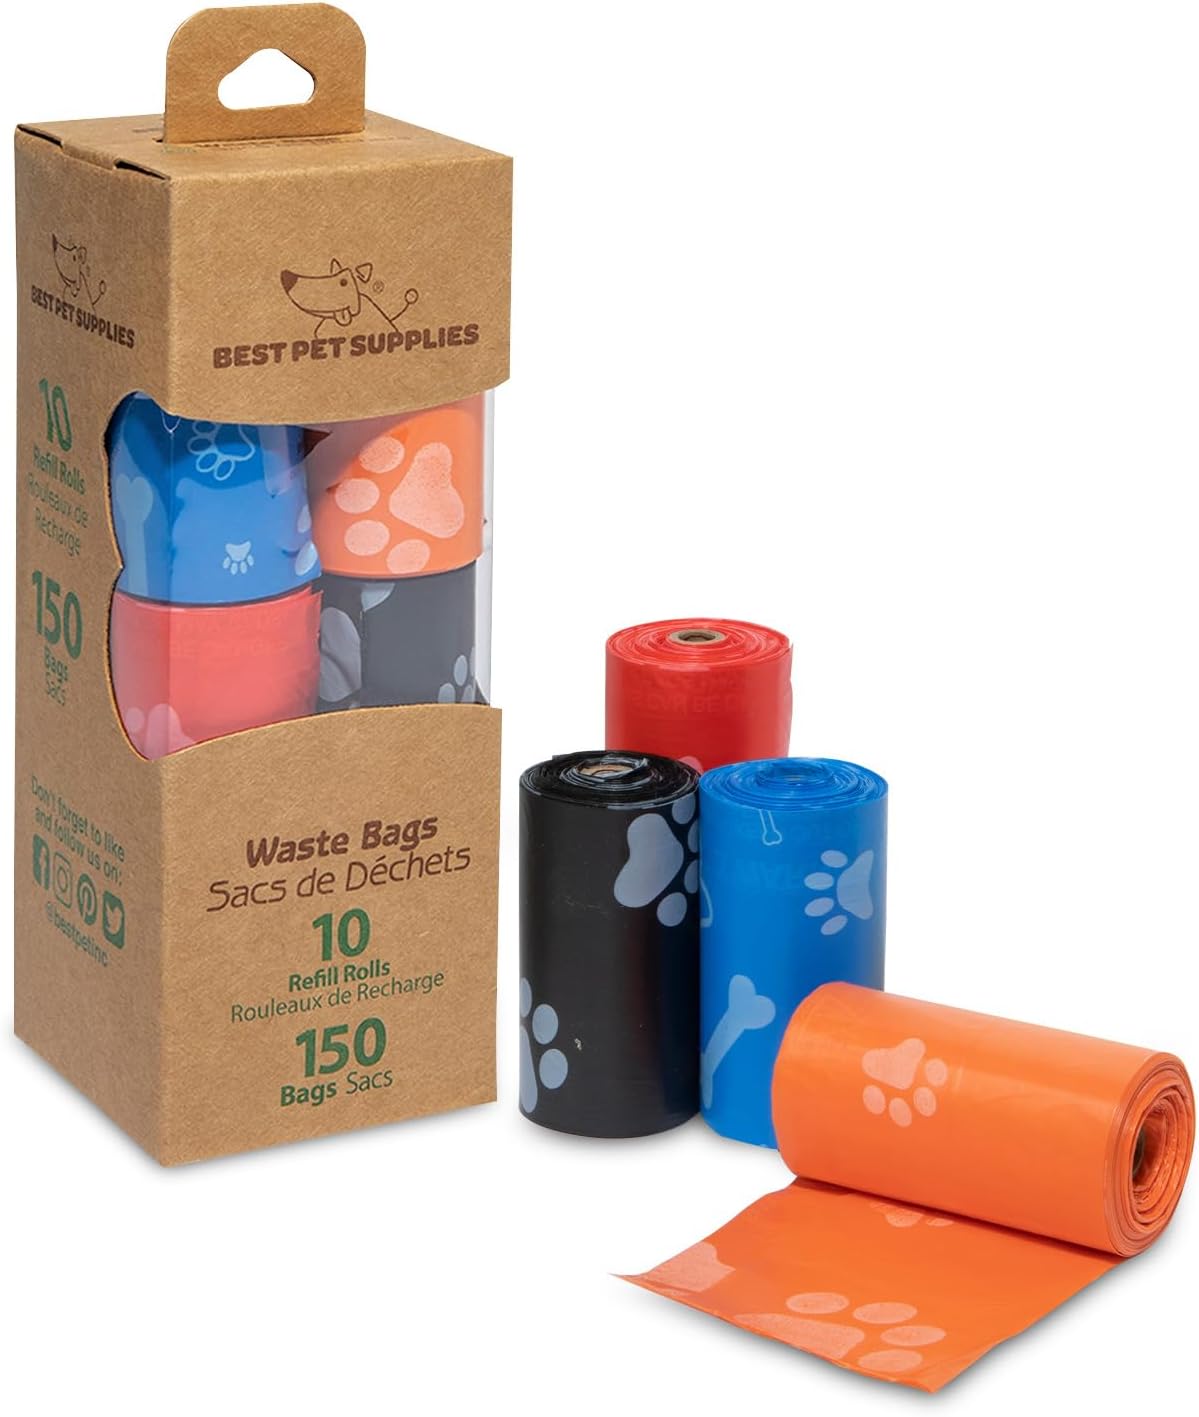 Premium Dog Poop Bags for Clean Outdoor Adventures - Waste Cleanup, Leak-Proof, Eco-Friendly Proof and Tear Resistant, Thick Plastic - Assorted Colors, 150 Bags